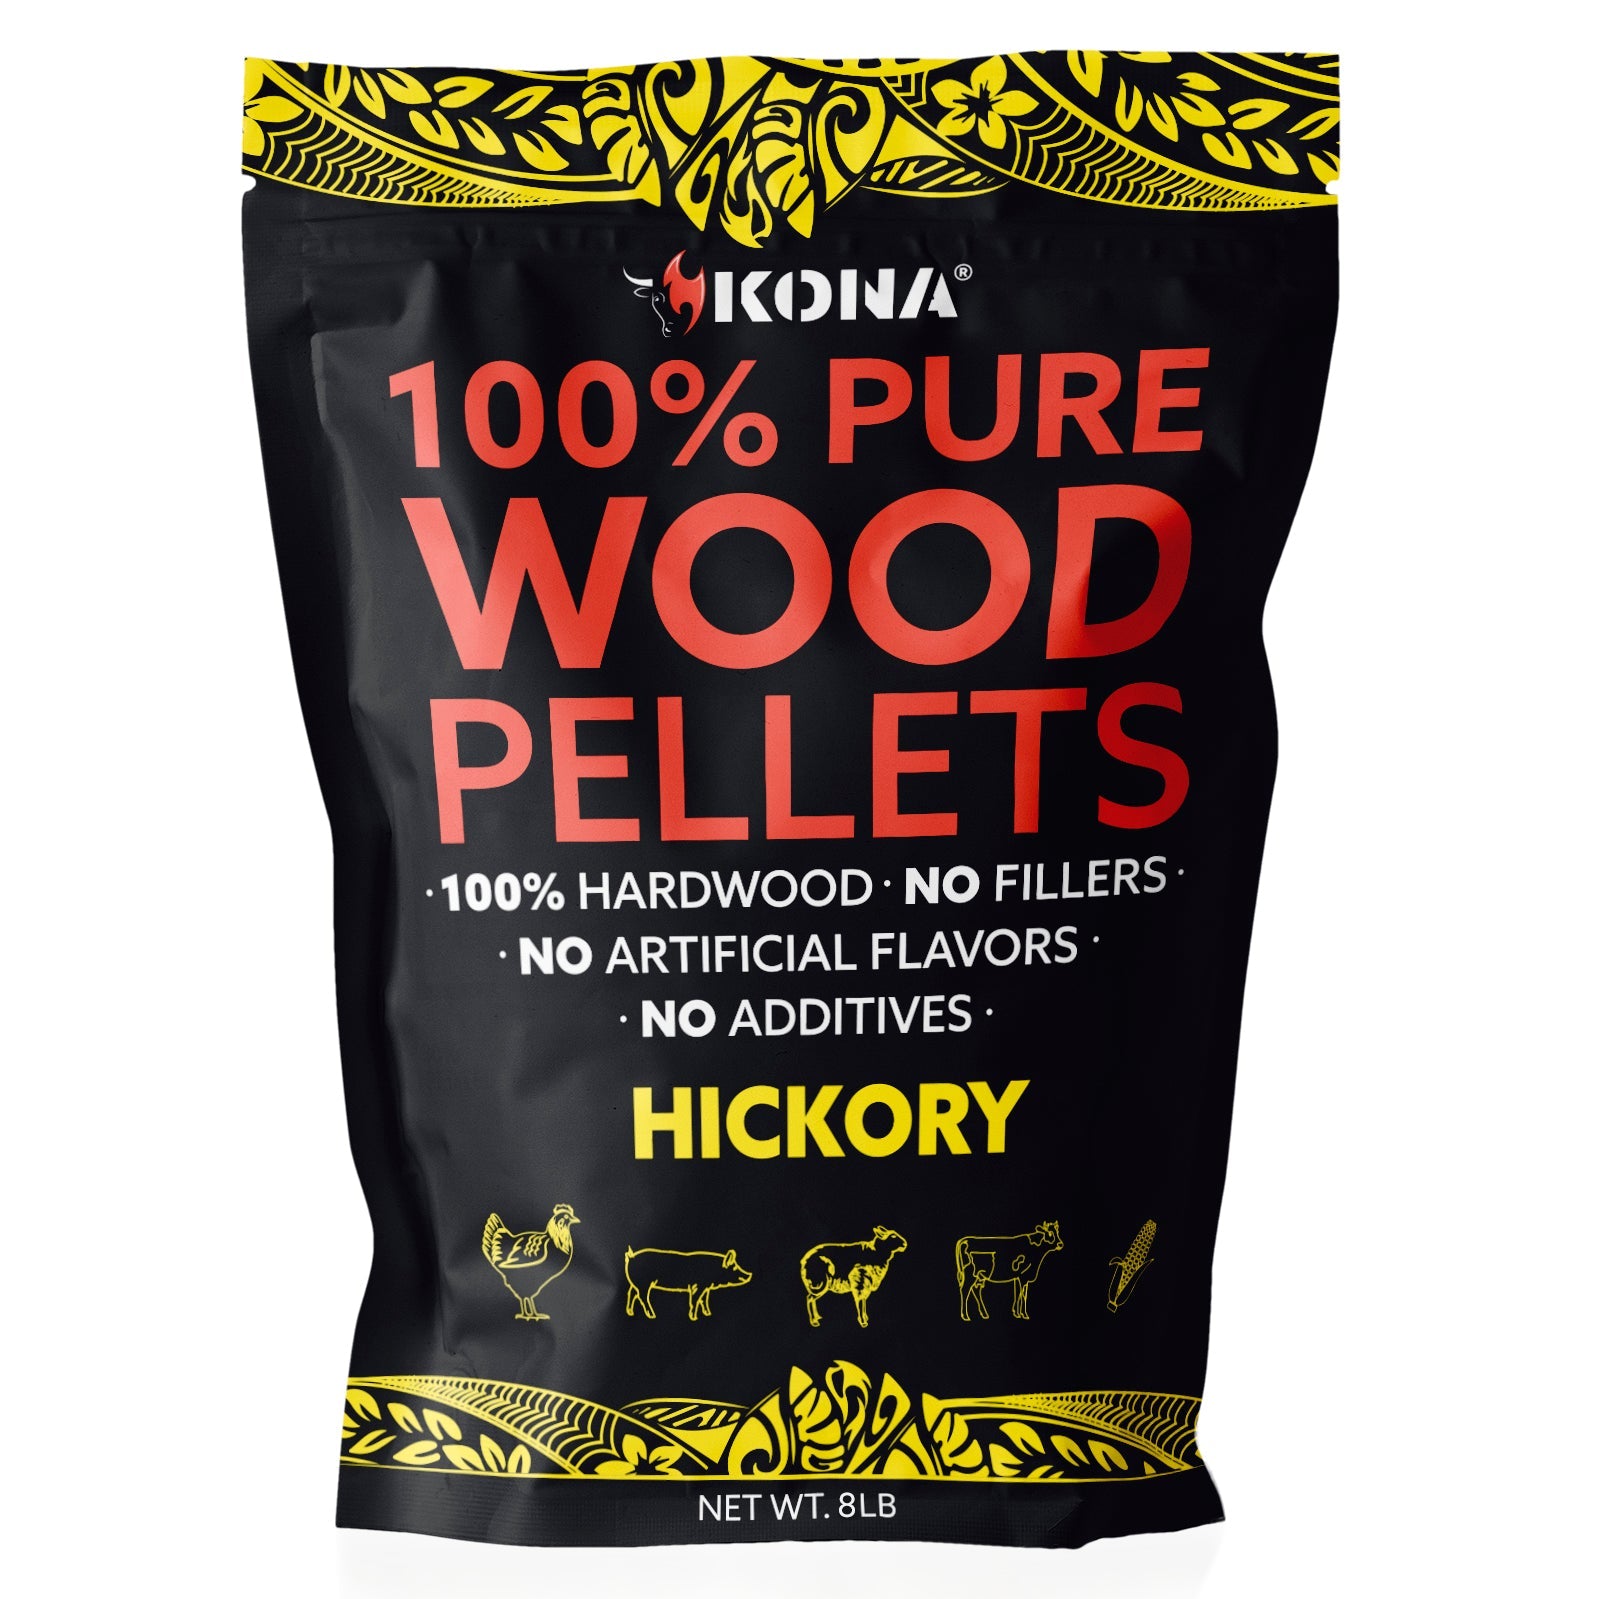 Kona 100% Hickory Wood Pellets - Grilling, BBQ & Smoking - Concentrated Pure Hardwood - Bold Smoke - The Tool Store